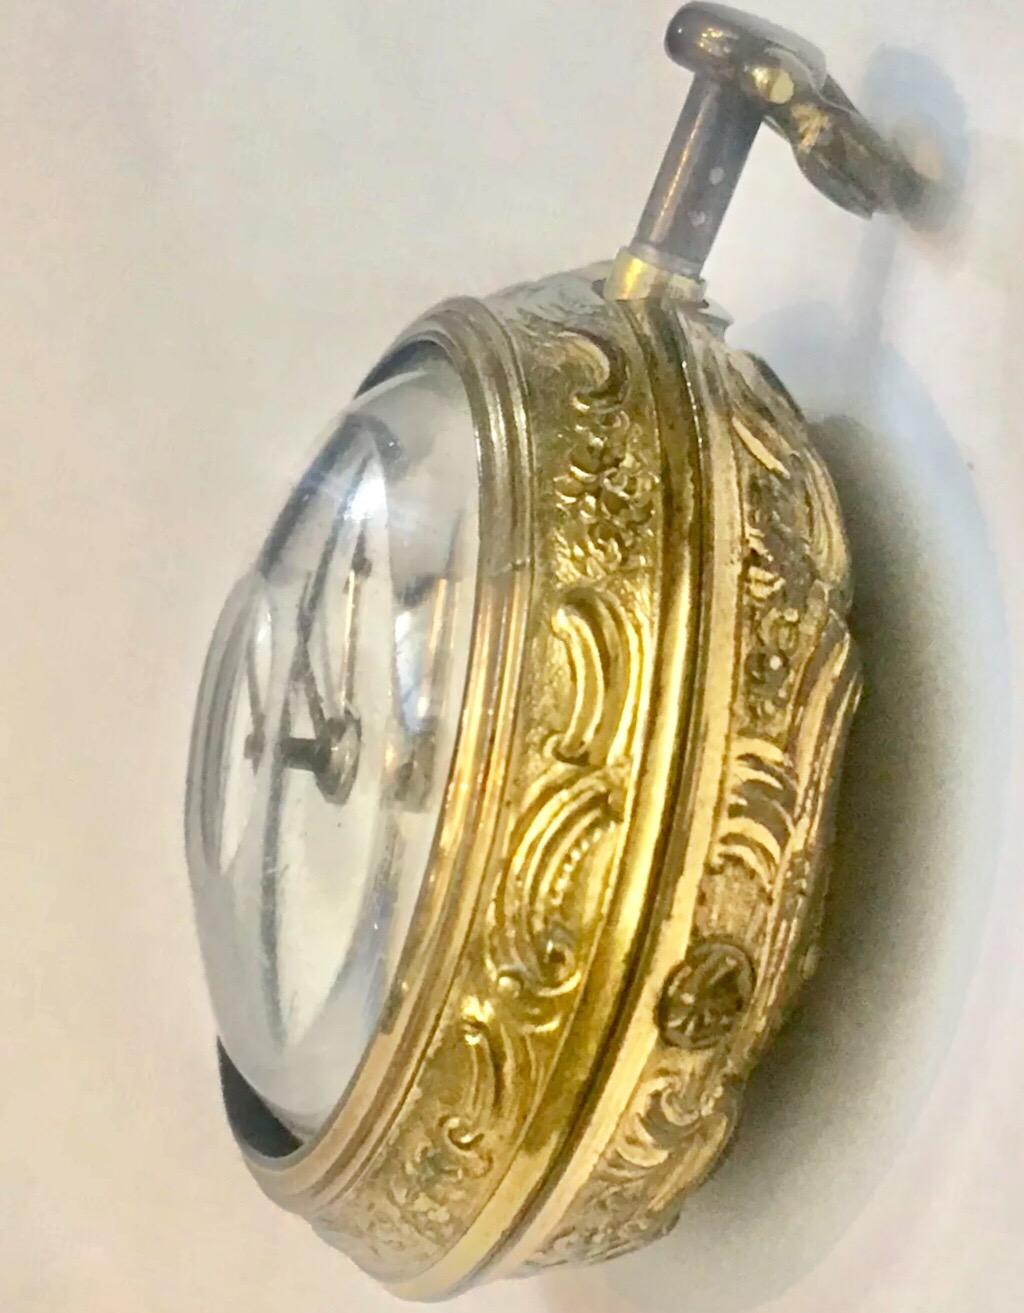 Rare “Dumb” Quarter Repeating Repousse Verge Fusee Pocket Watch by Hubert London In Good Condition For Sale In Carlisle, GB